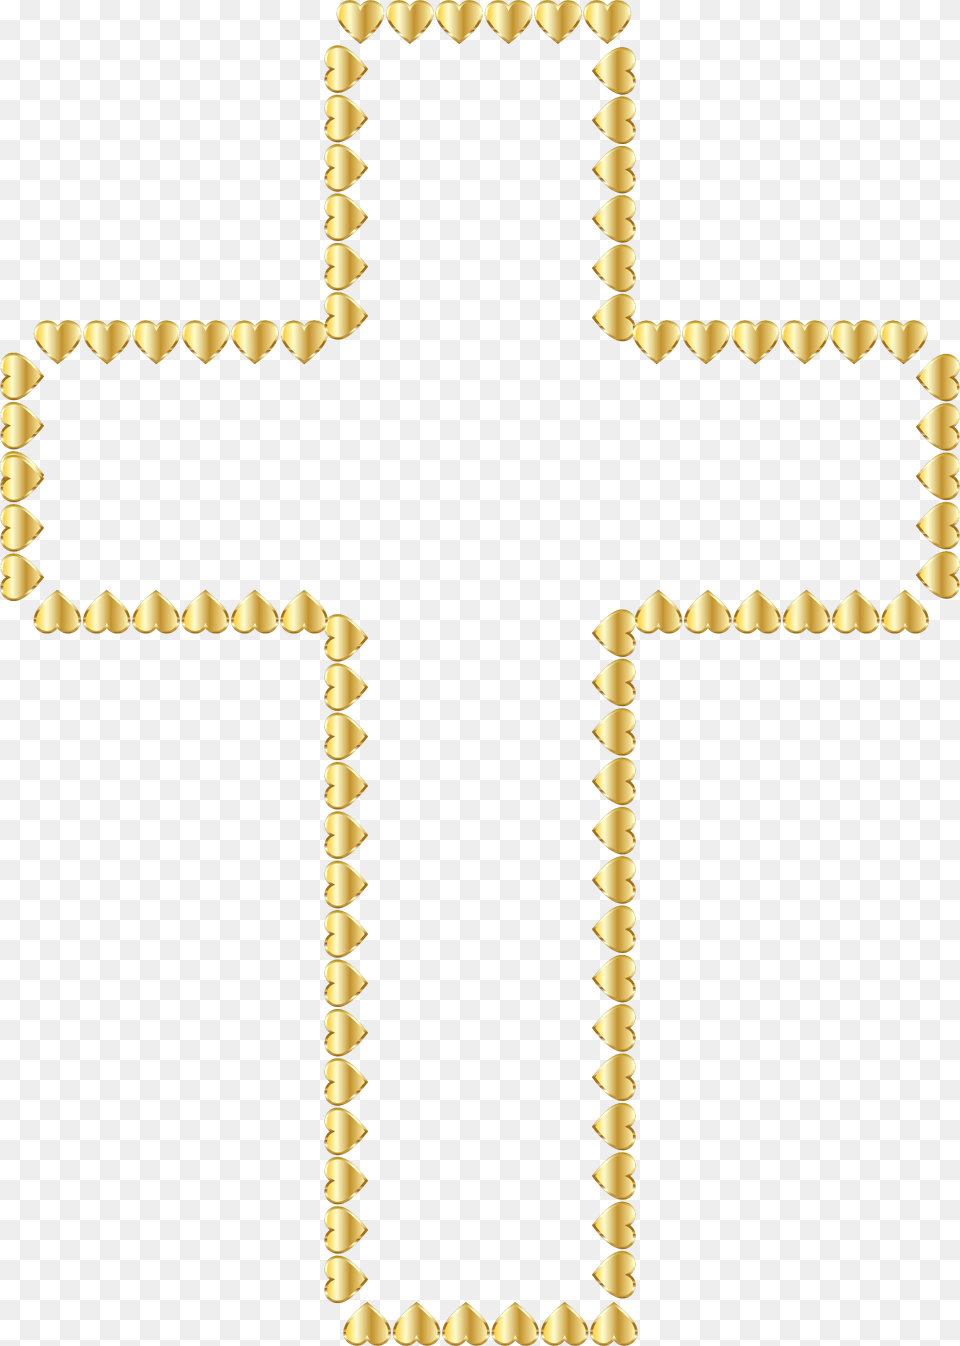 Gold Cross With No Background, Symbol Png